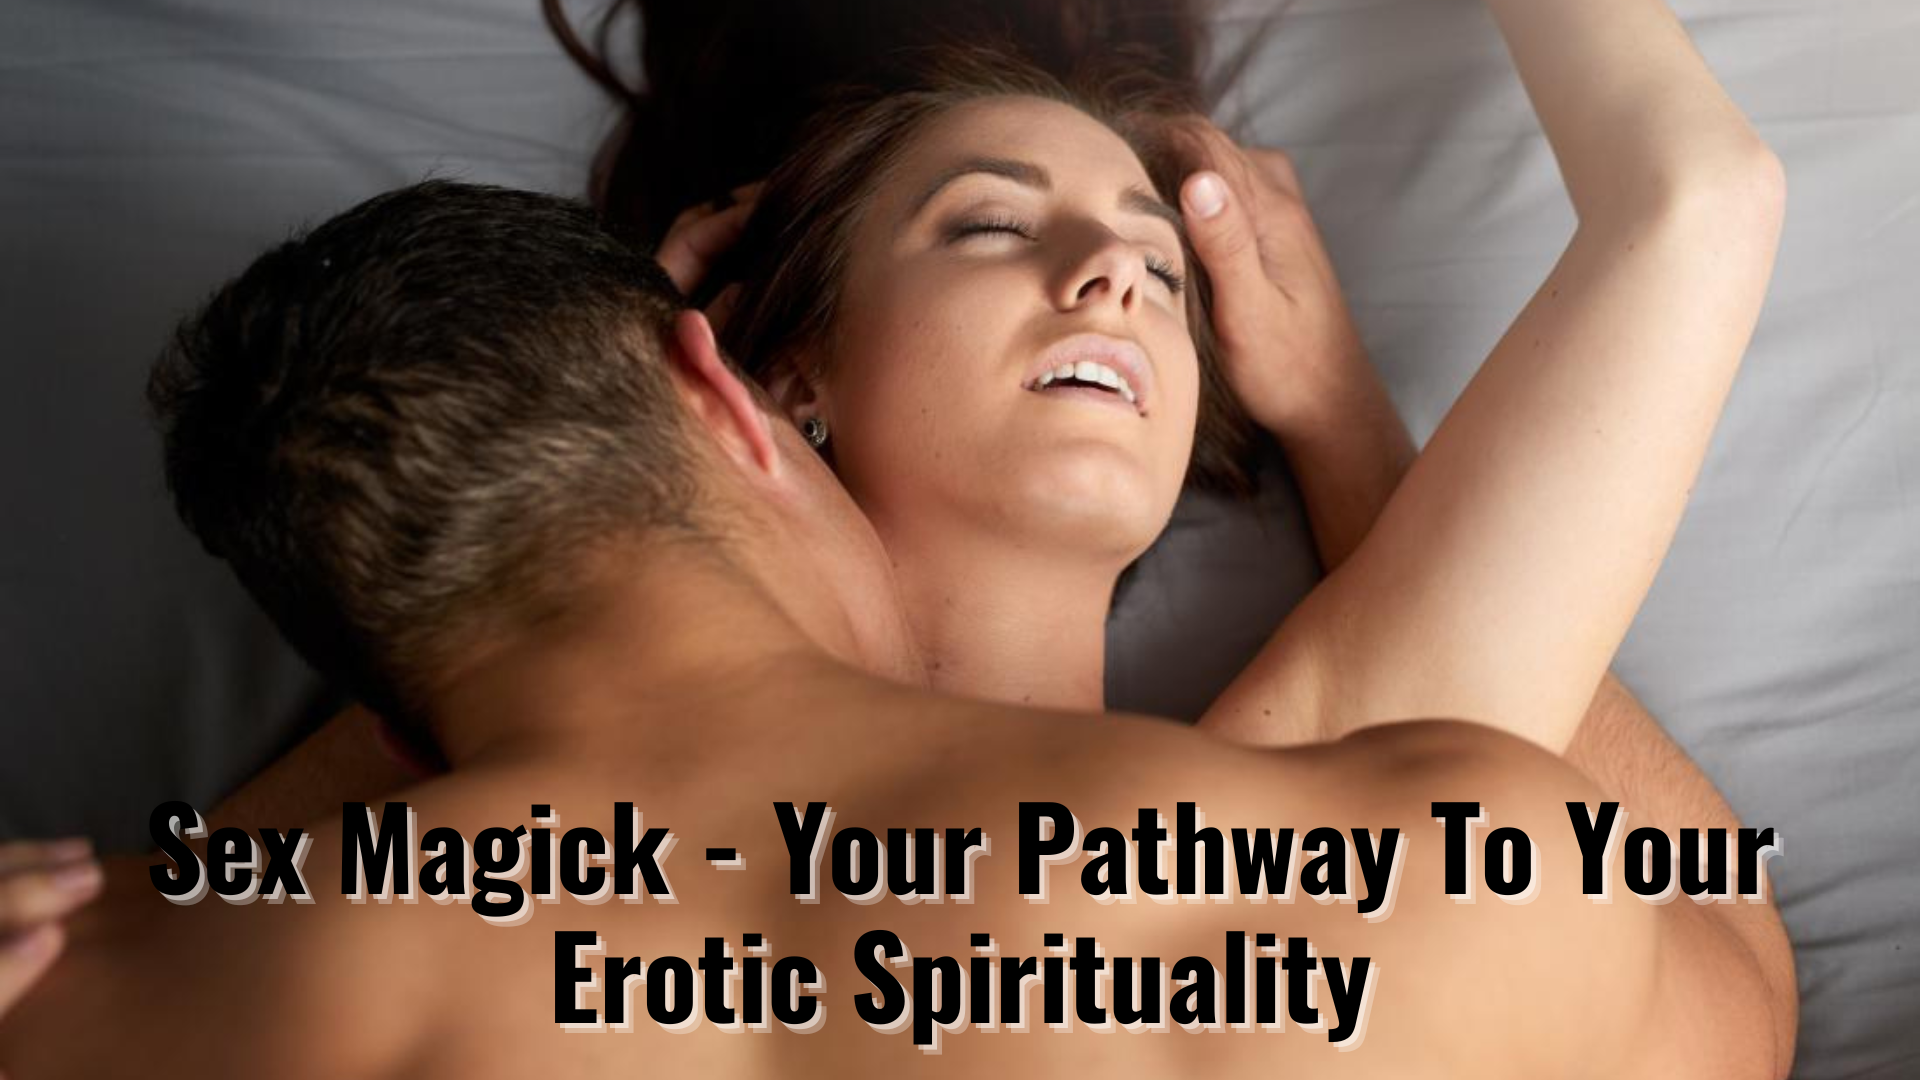 Sex Magick - Your Pathway To Your Erotic Spirituality